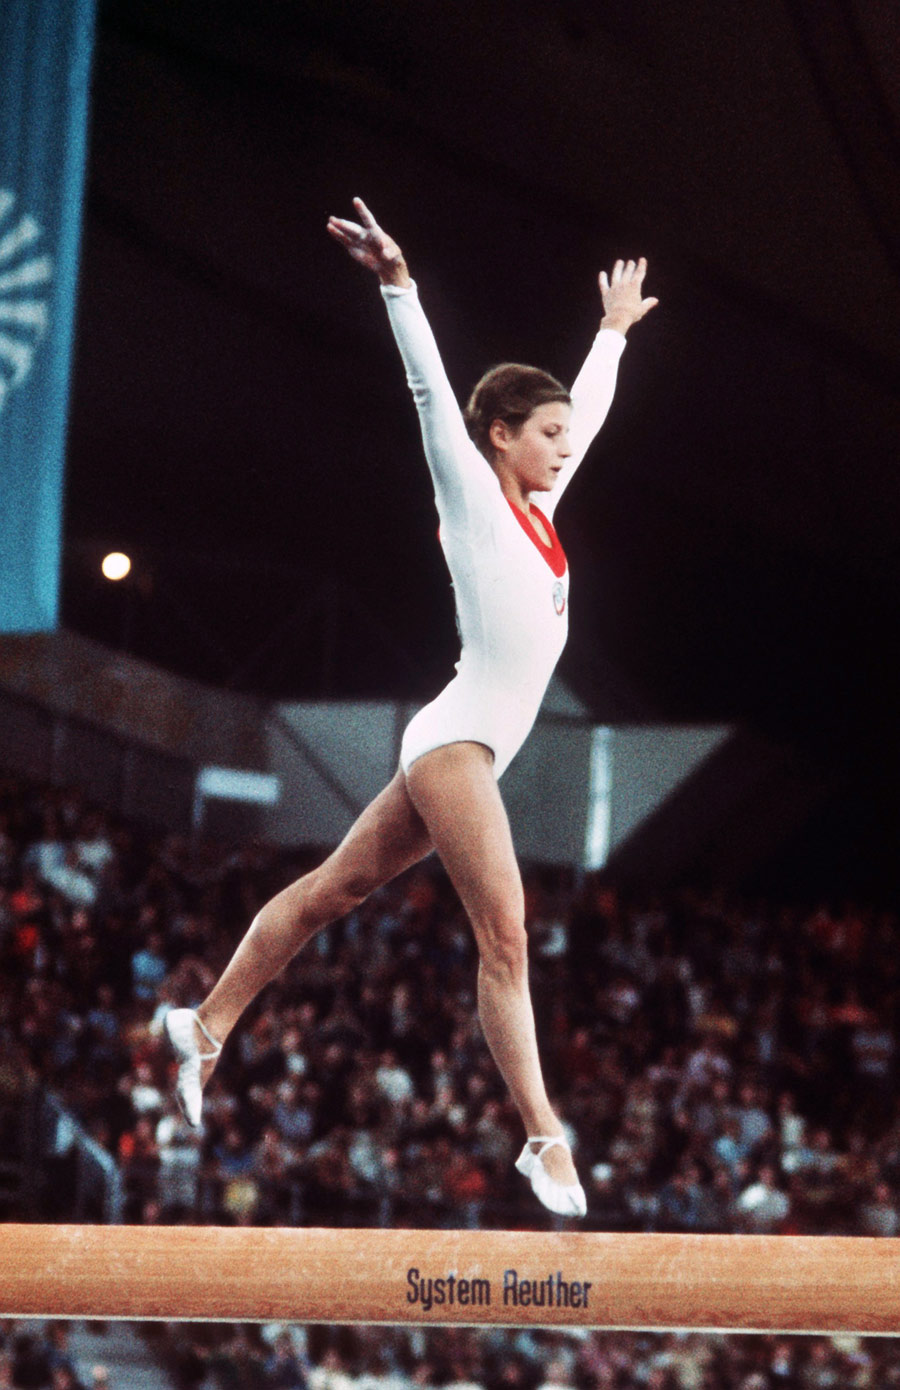 Olga Korbut won gold in the team competition, beam and the floor